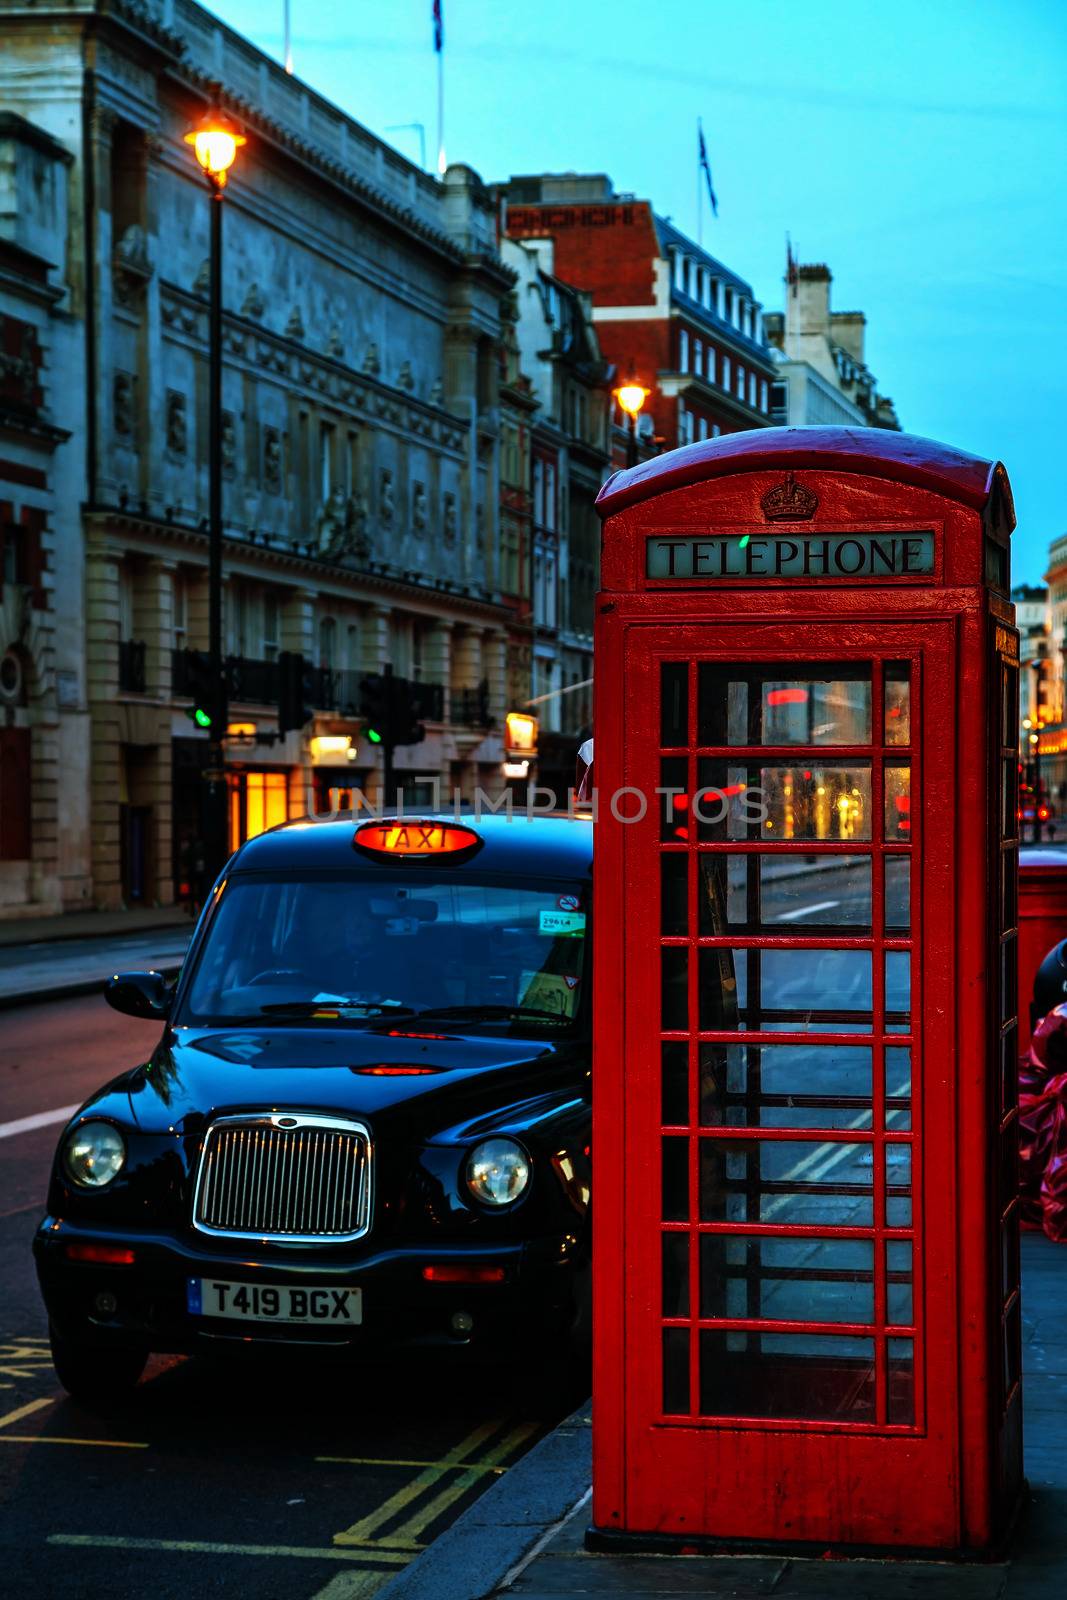 Famous red telephone booth and taxi cab in London by AndreyKr